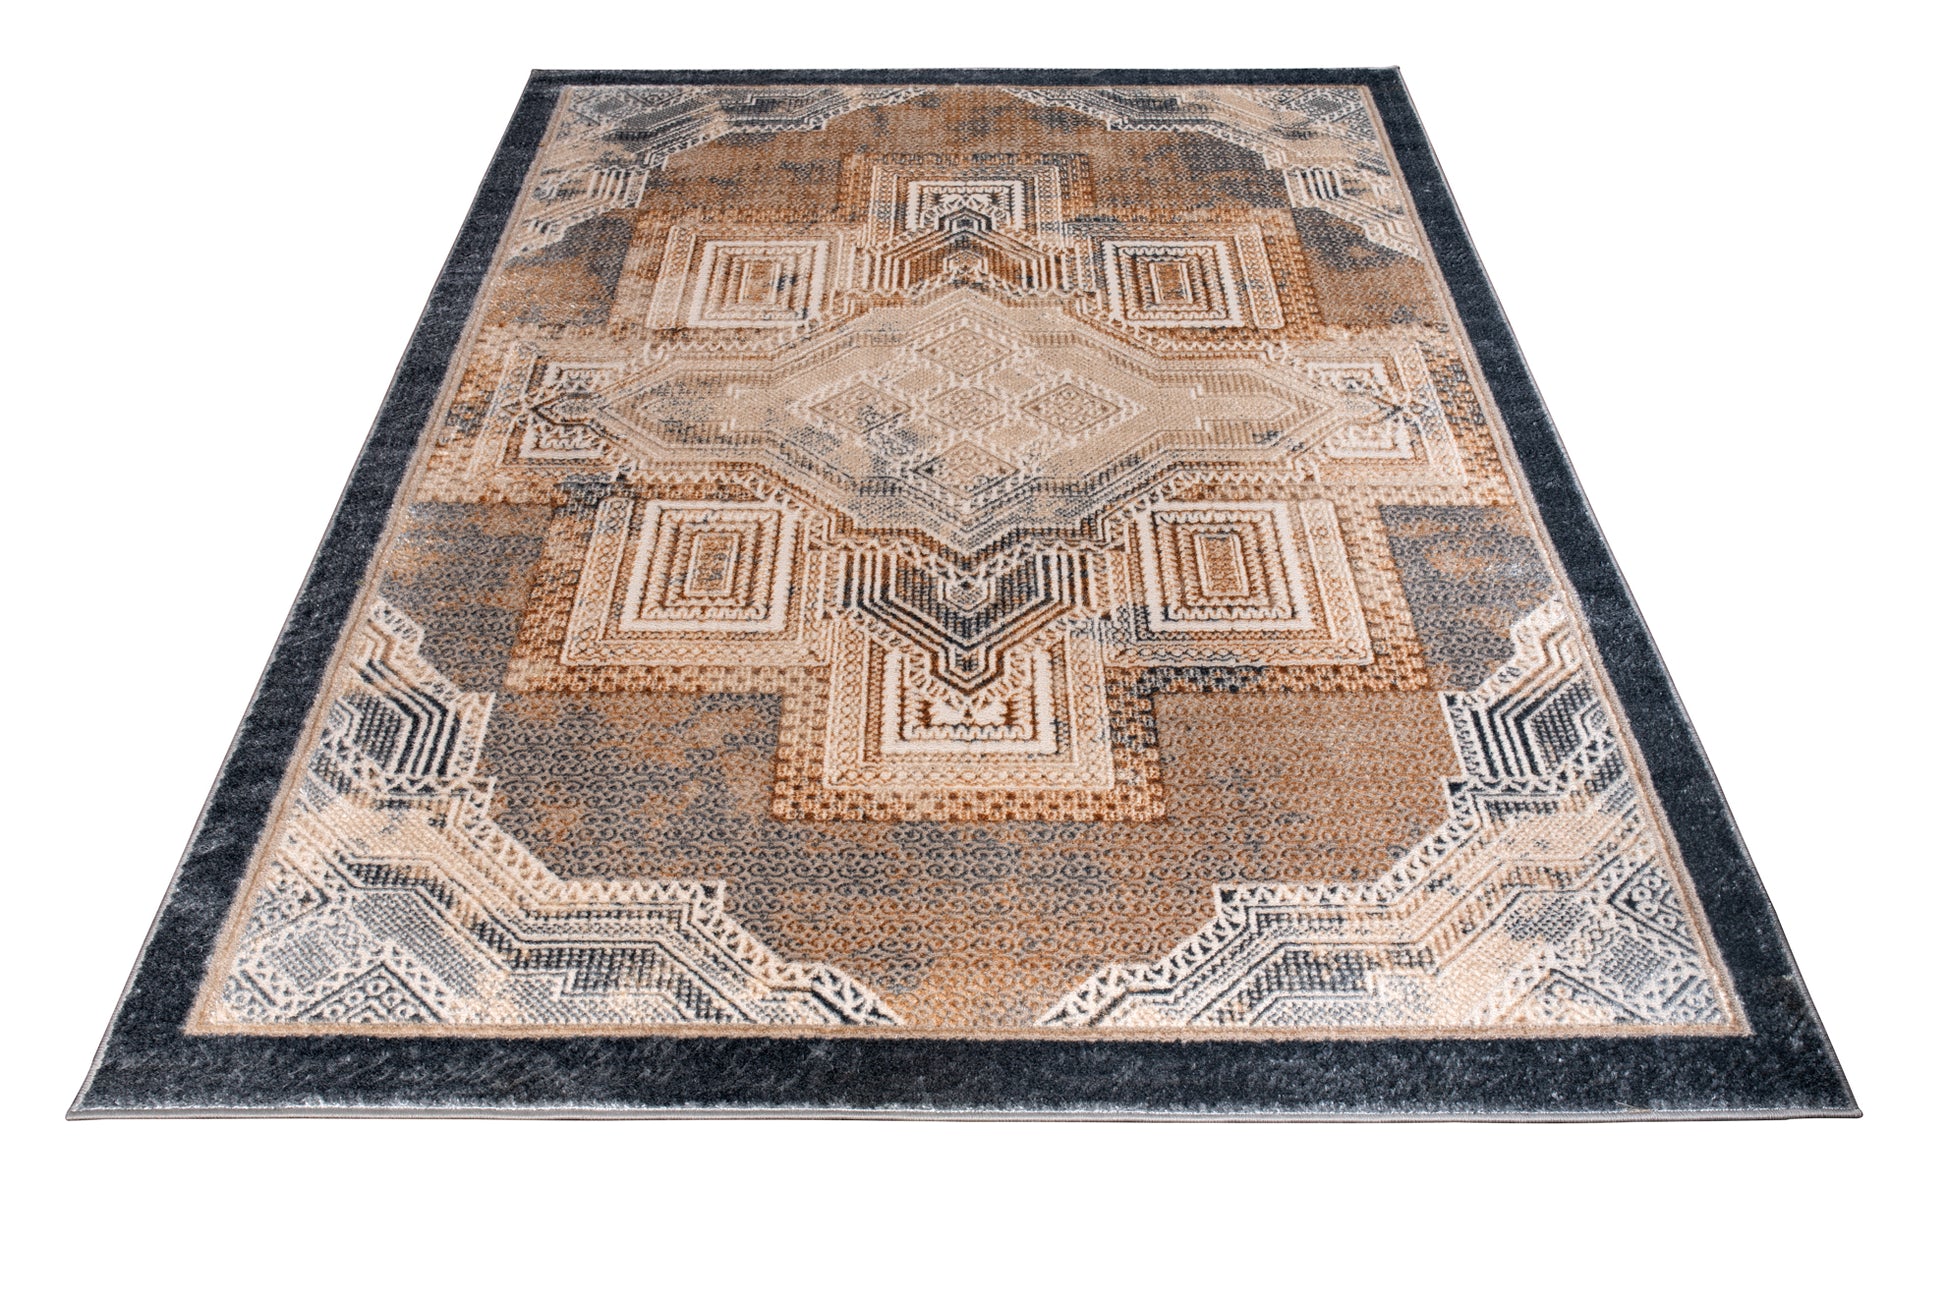 beige brown silver grey metalic traditional geometric contemporary area rug 6x8, 6x9 ft Living Room, Bedroom, Dining Area, Kitchen Carpet